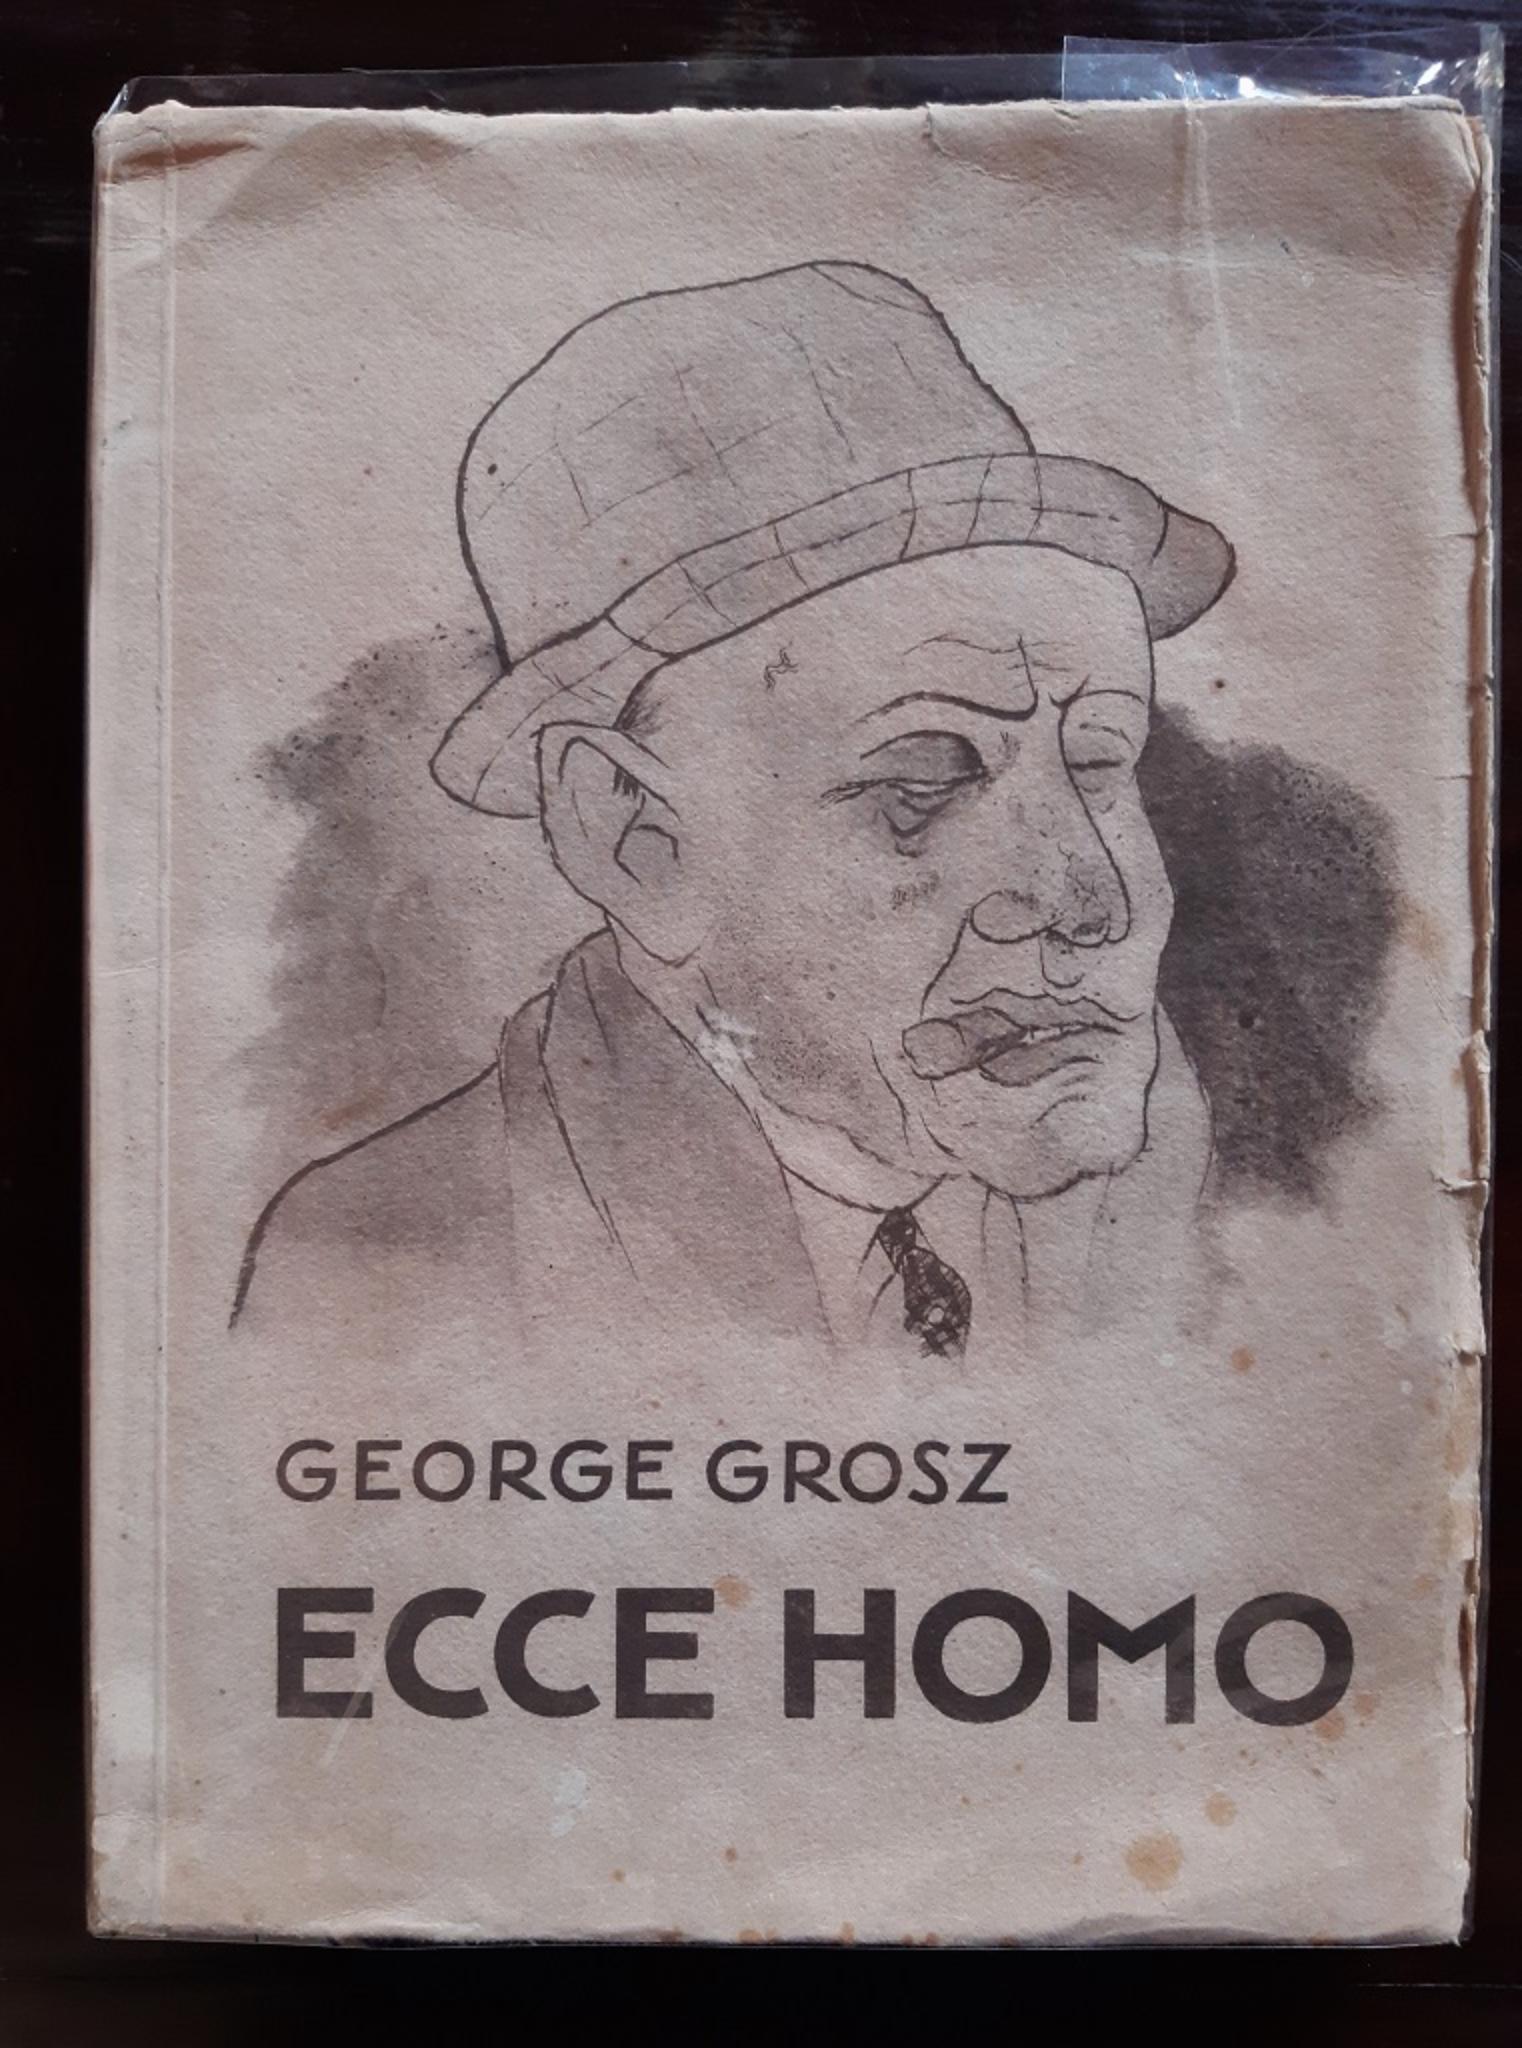 Ecce Homo - Rare Book Illustrated by George Grosz - 1923 For Sale 4